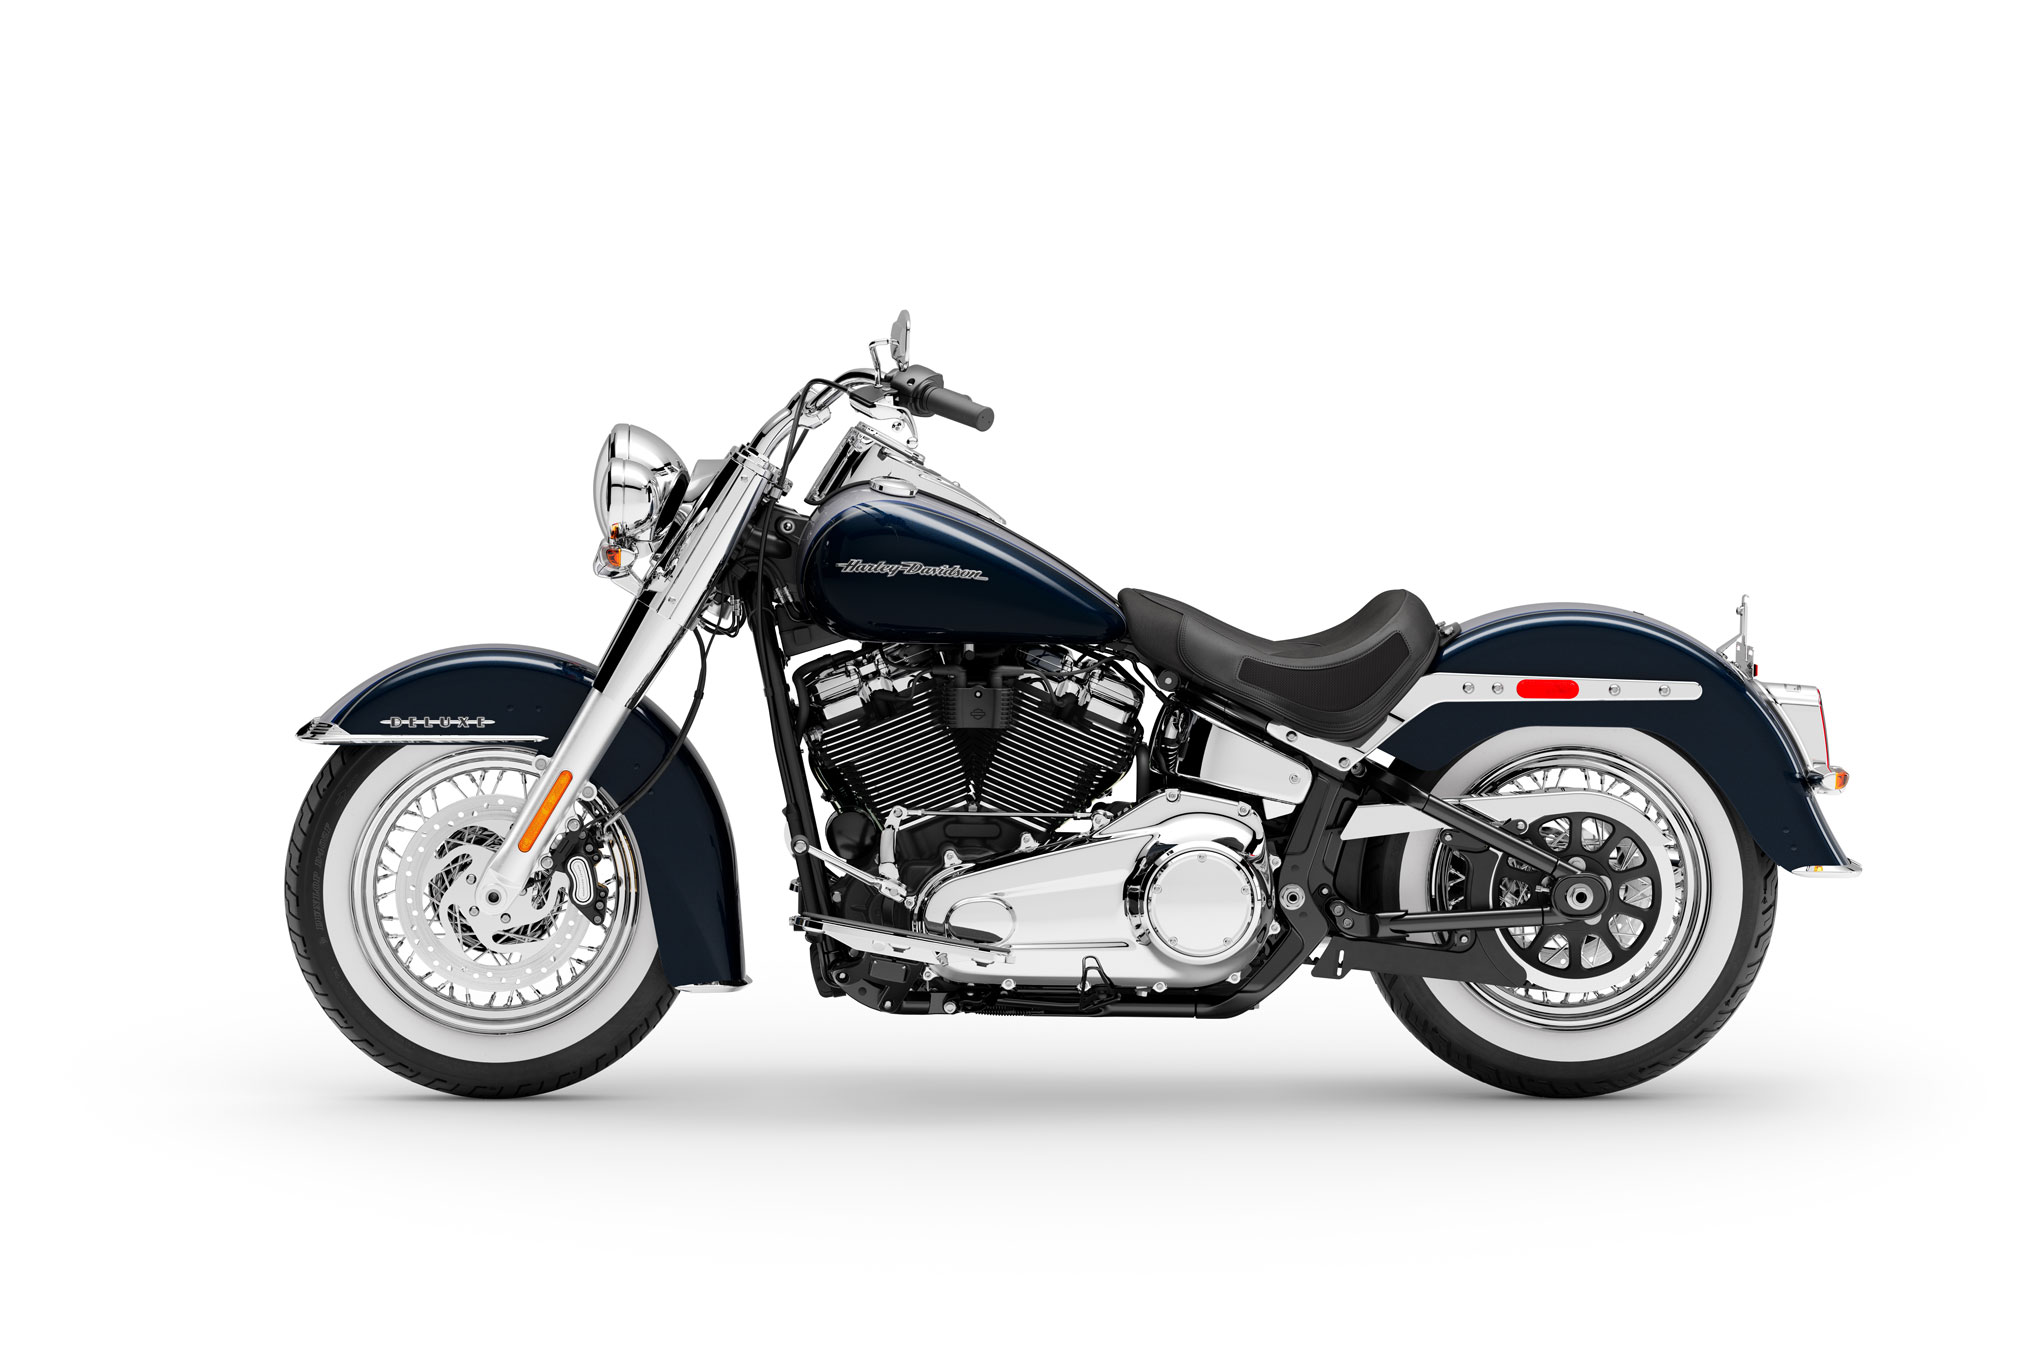  2019 Harley Davidson Deluxe Pictures Specs and Pricing 